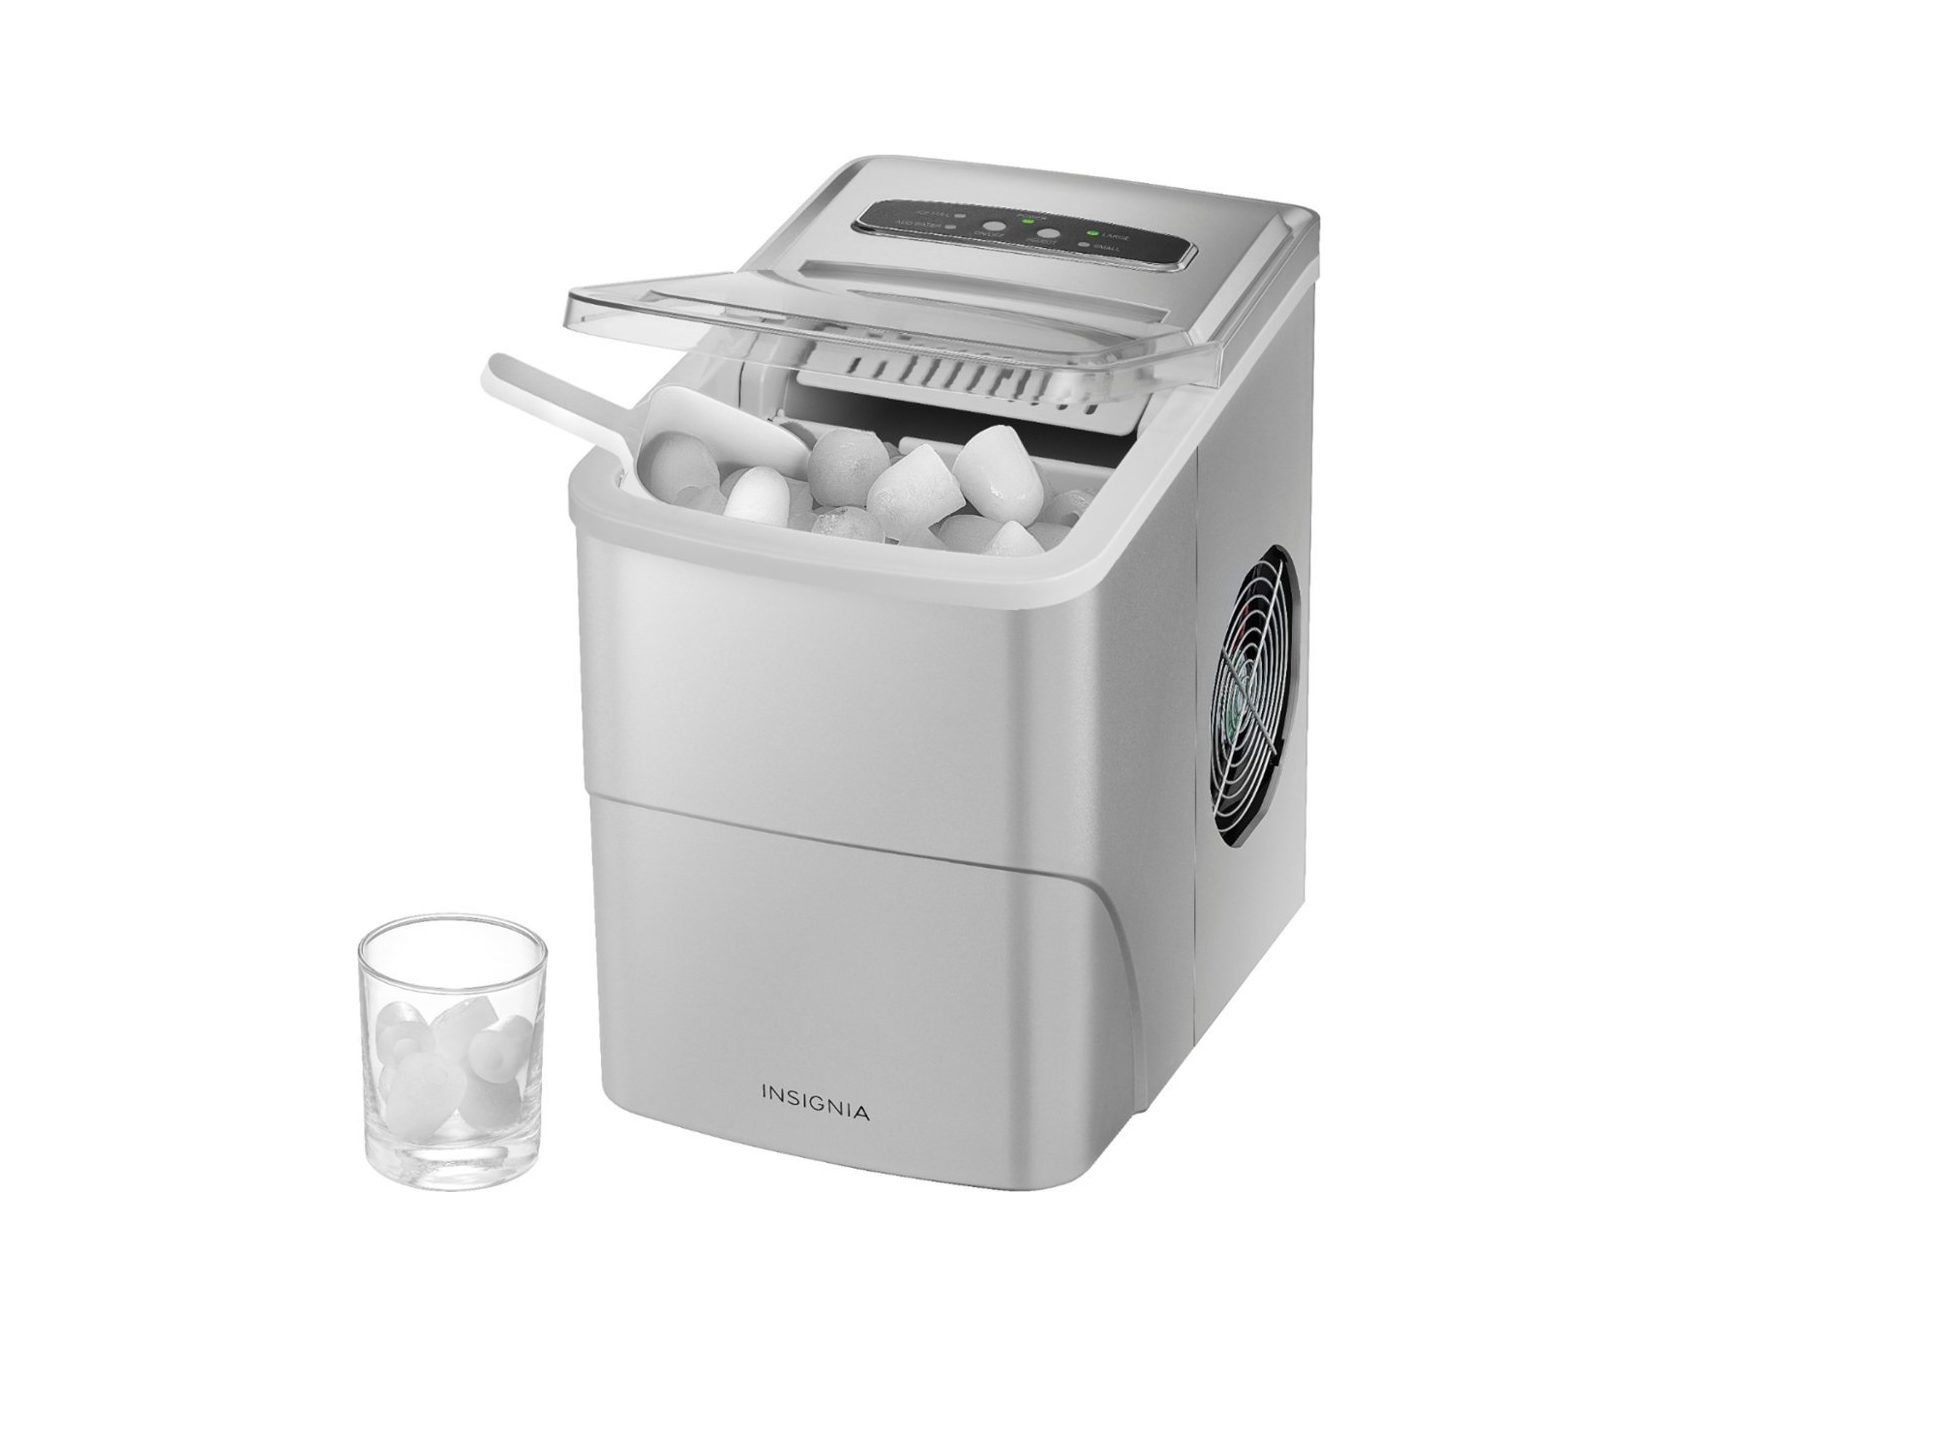 The Insignia 26-pound Portable Ice Maker, filled with ice and its ice scoop.